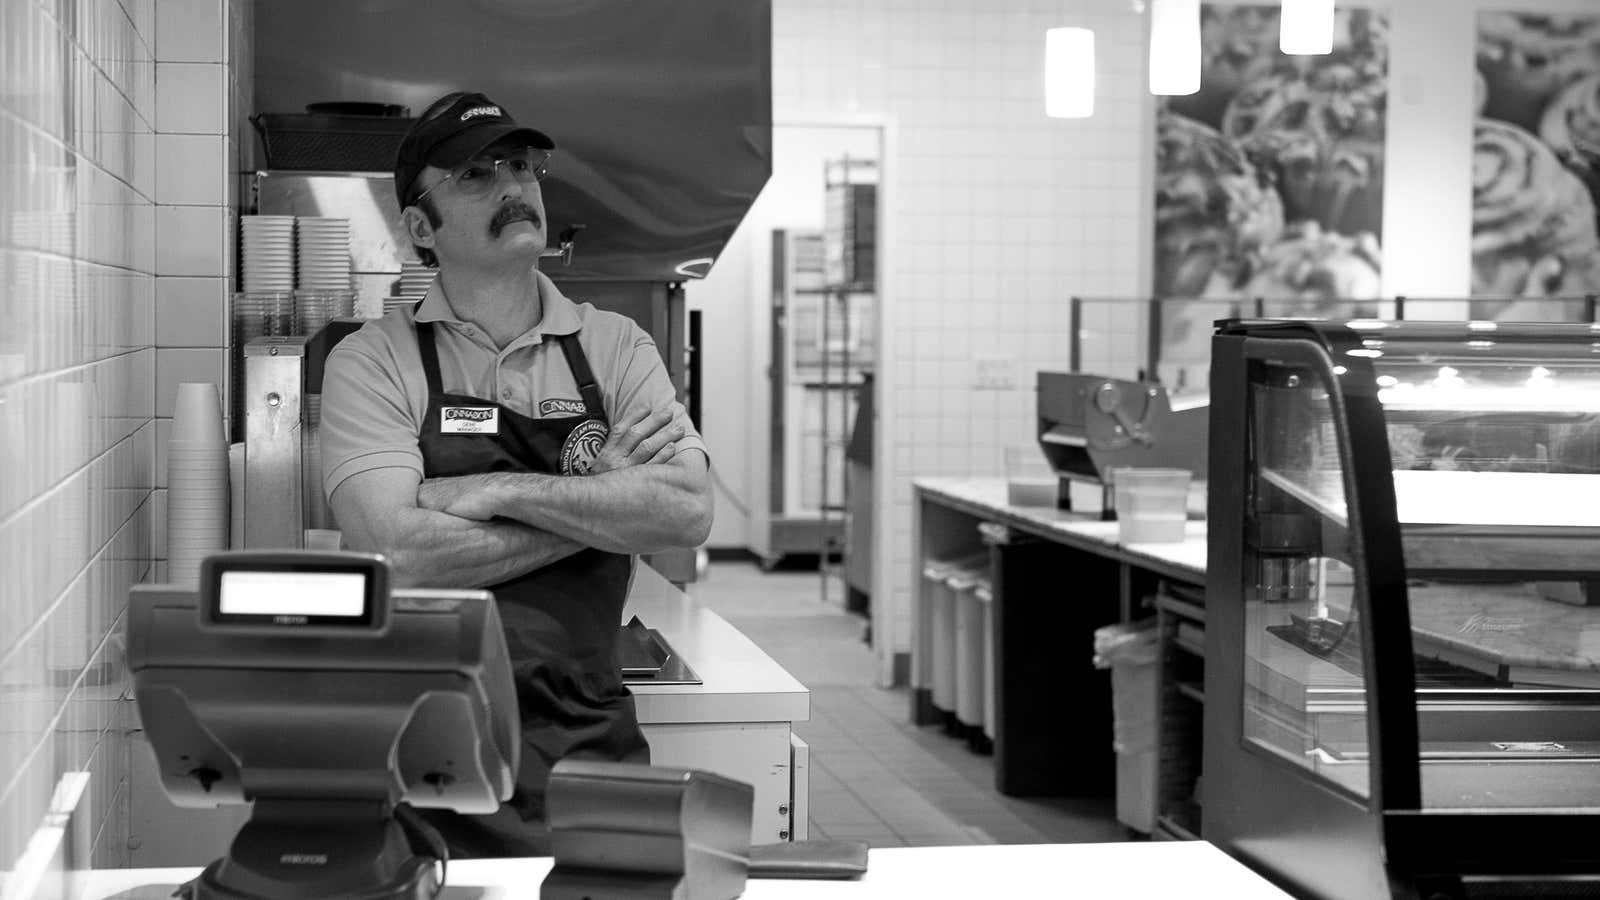 Cinnabon is making the most of its spotlight on “Better Call Saul.”